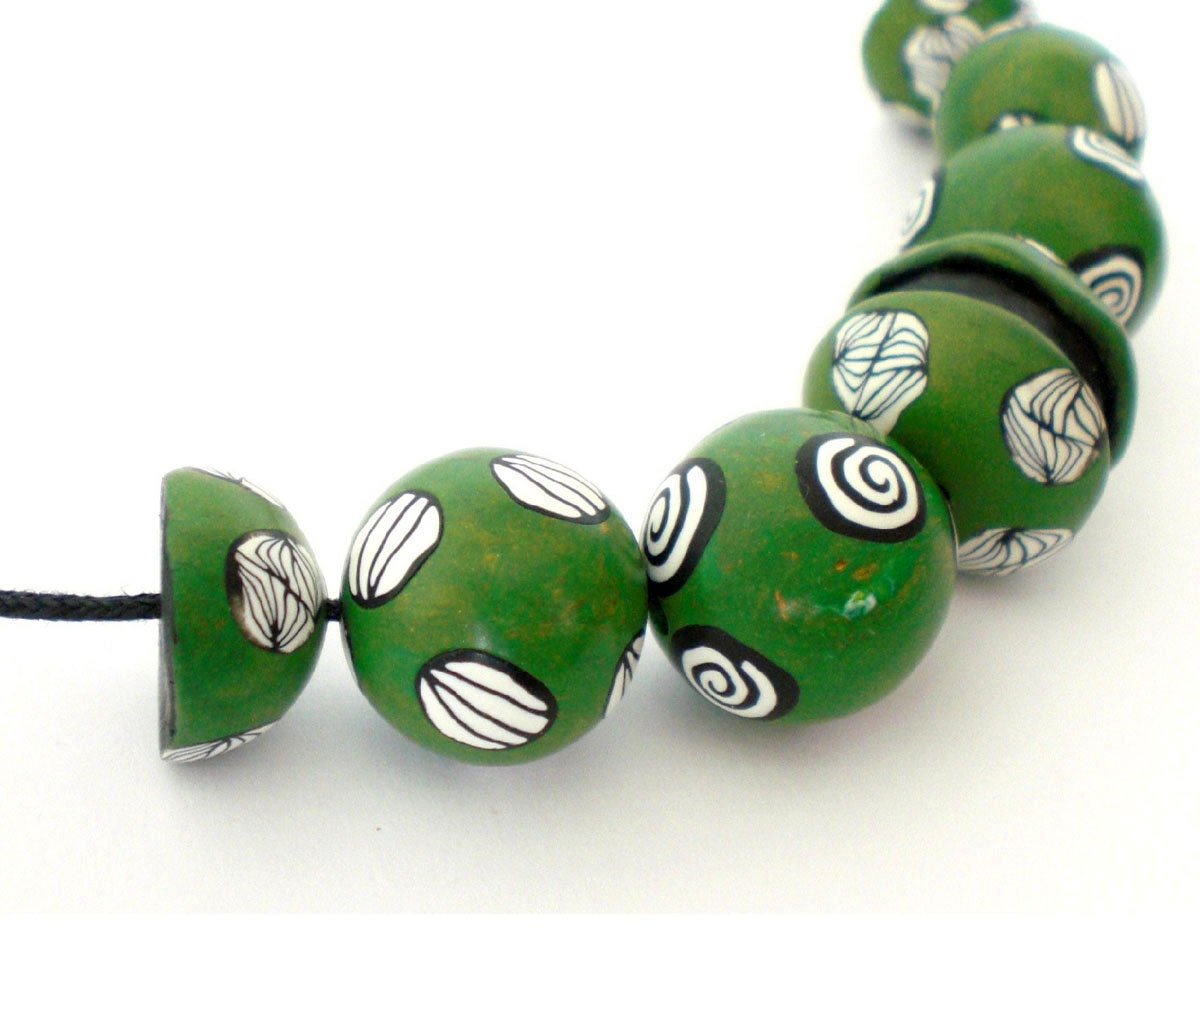 Necklace polymer clay Green, green game necklace, polymer clay necklace, green beads necklace